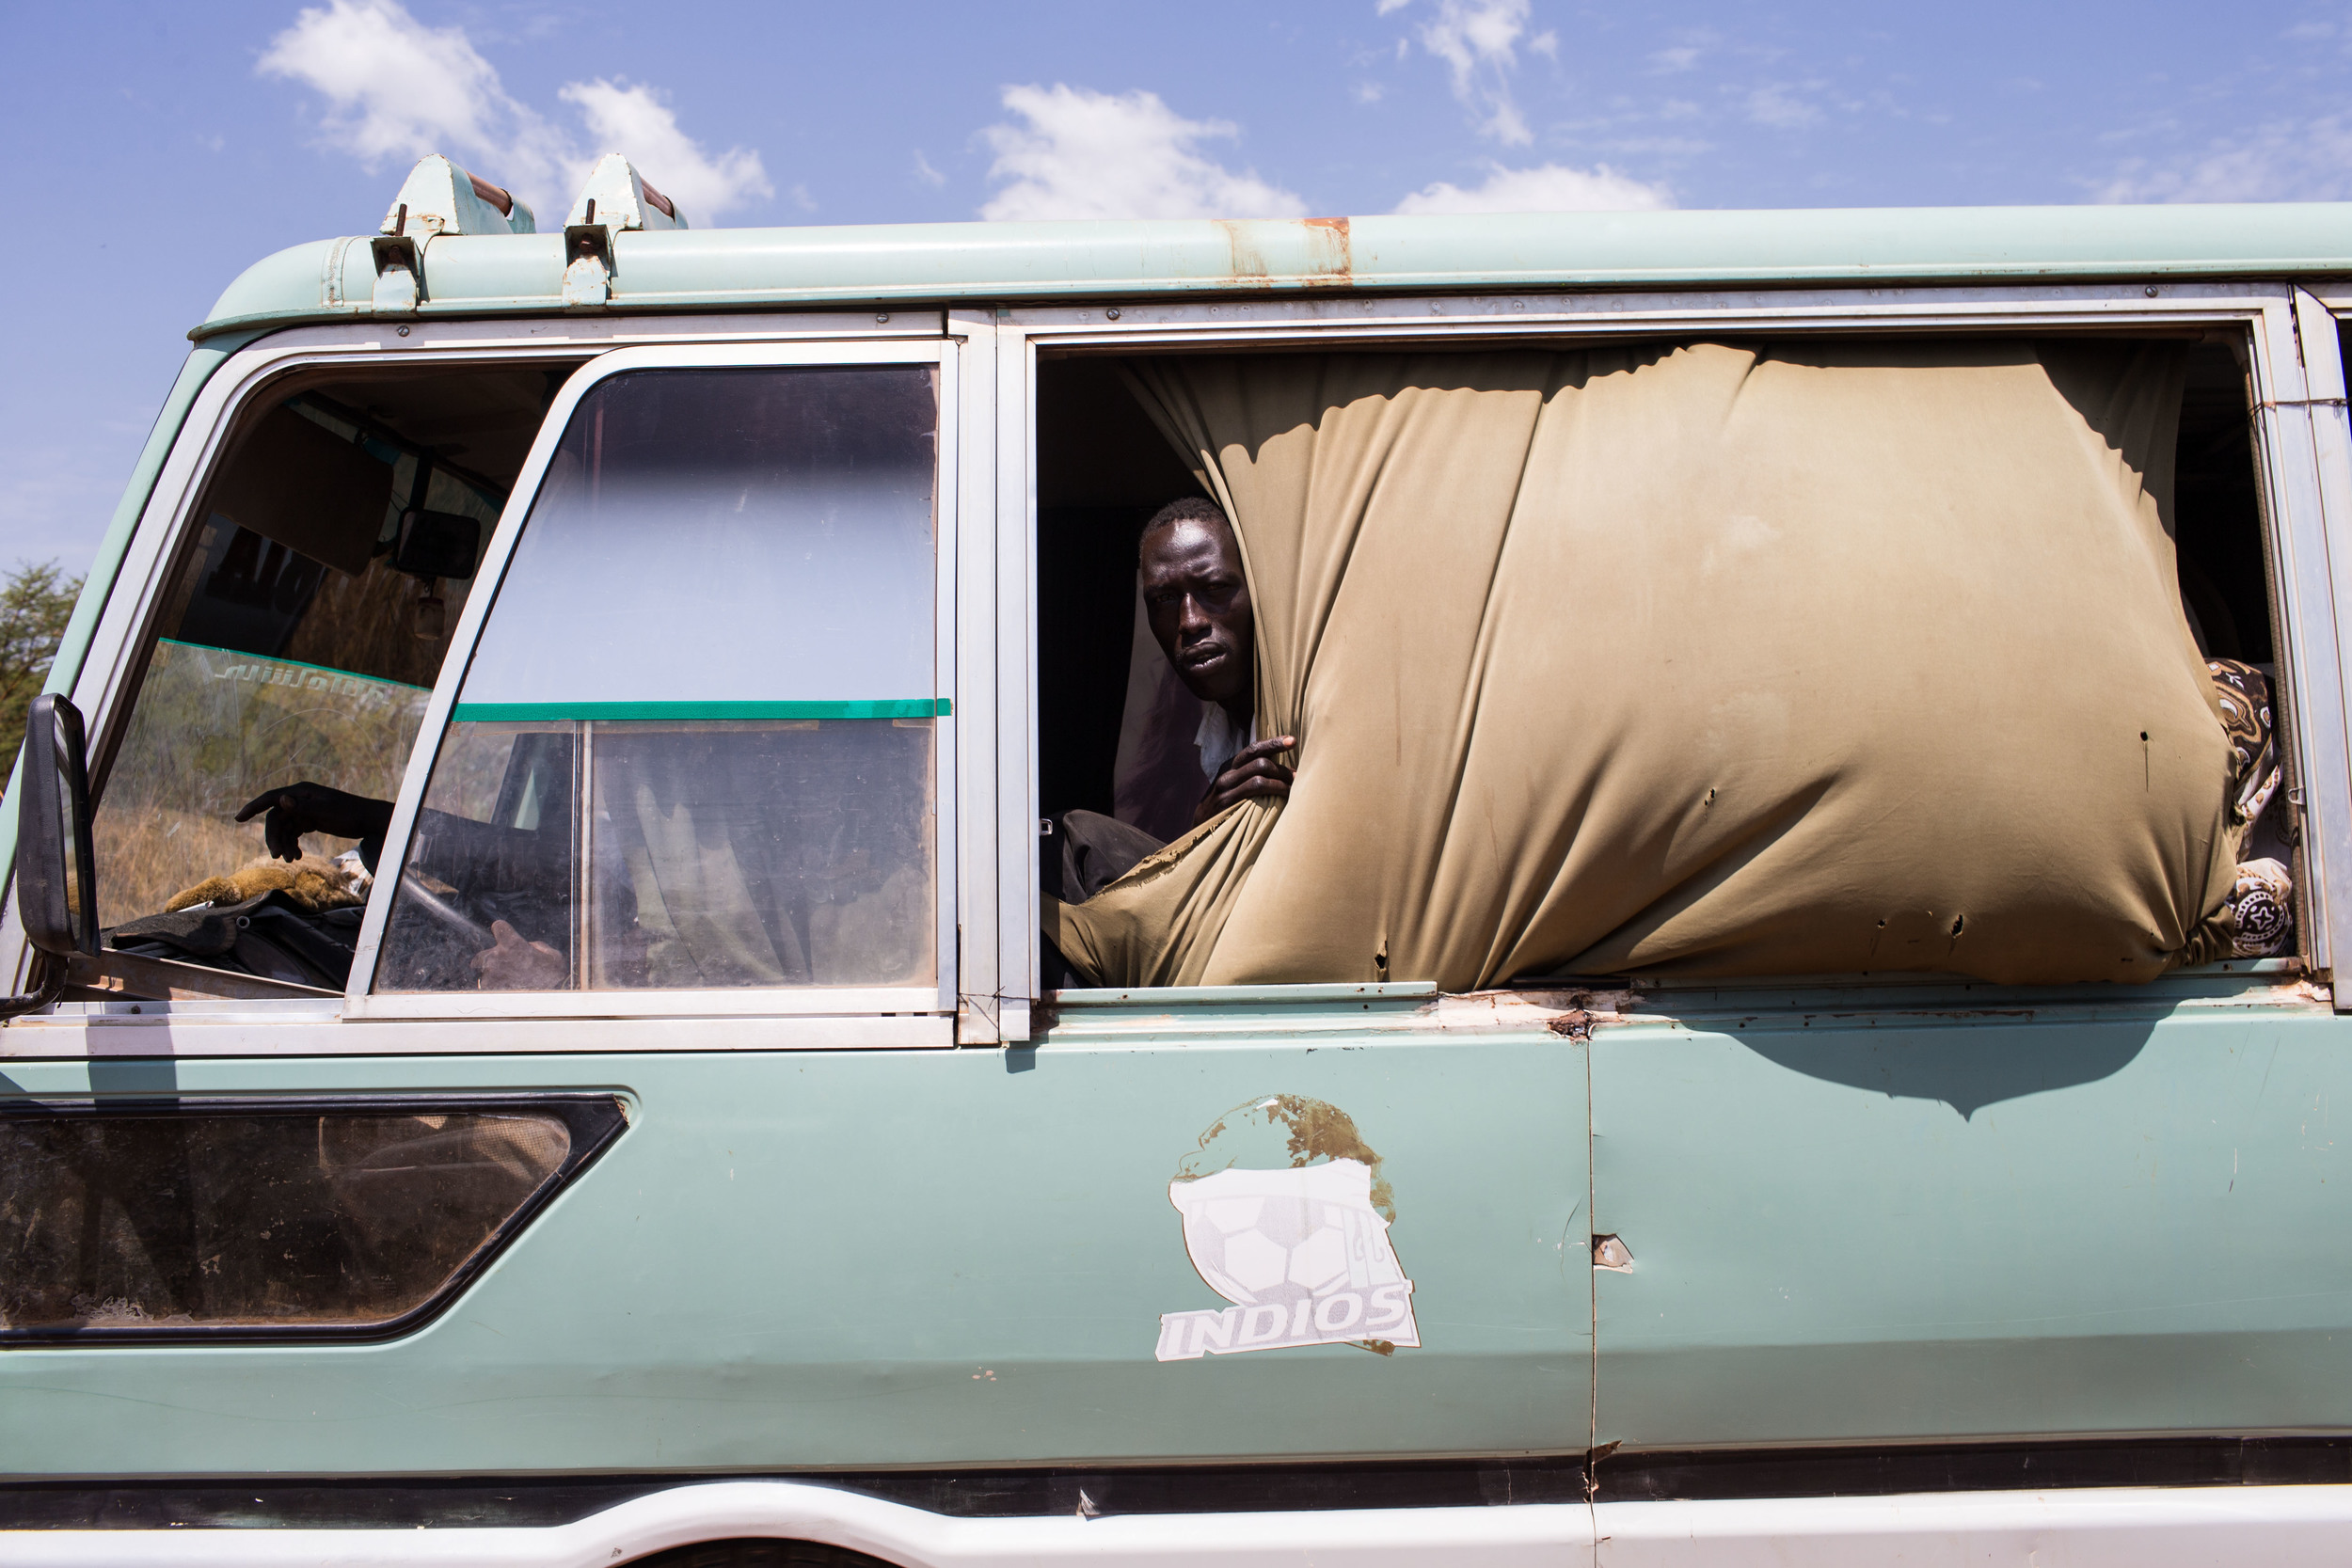  People travel from Agok, South Sudan to Abyei by bus. 64,775 people registered to vote in Abyei's referendum, many of whom were displaced by previous fighting but returned to Abyei to vote. 